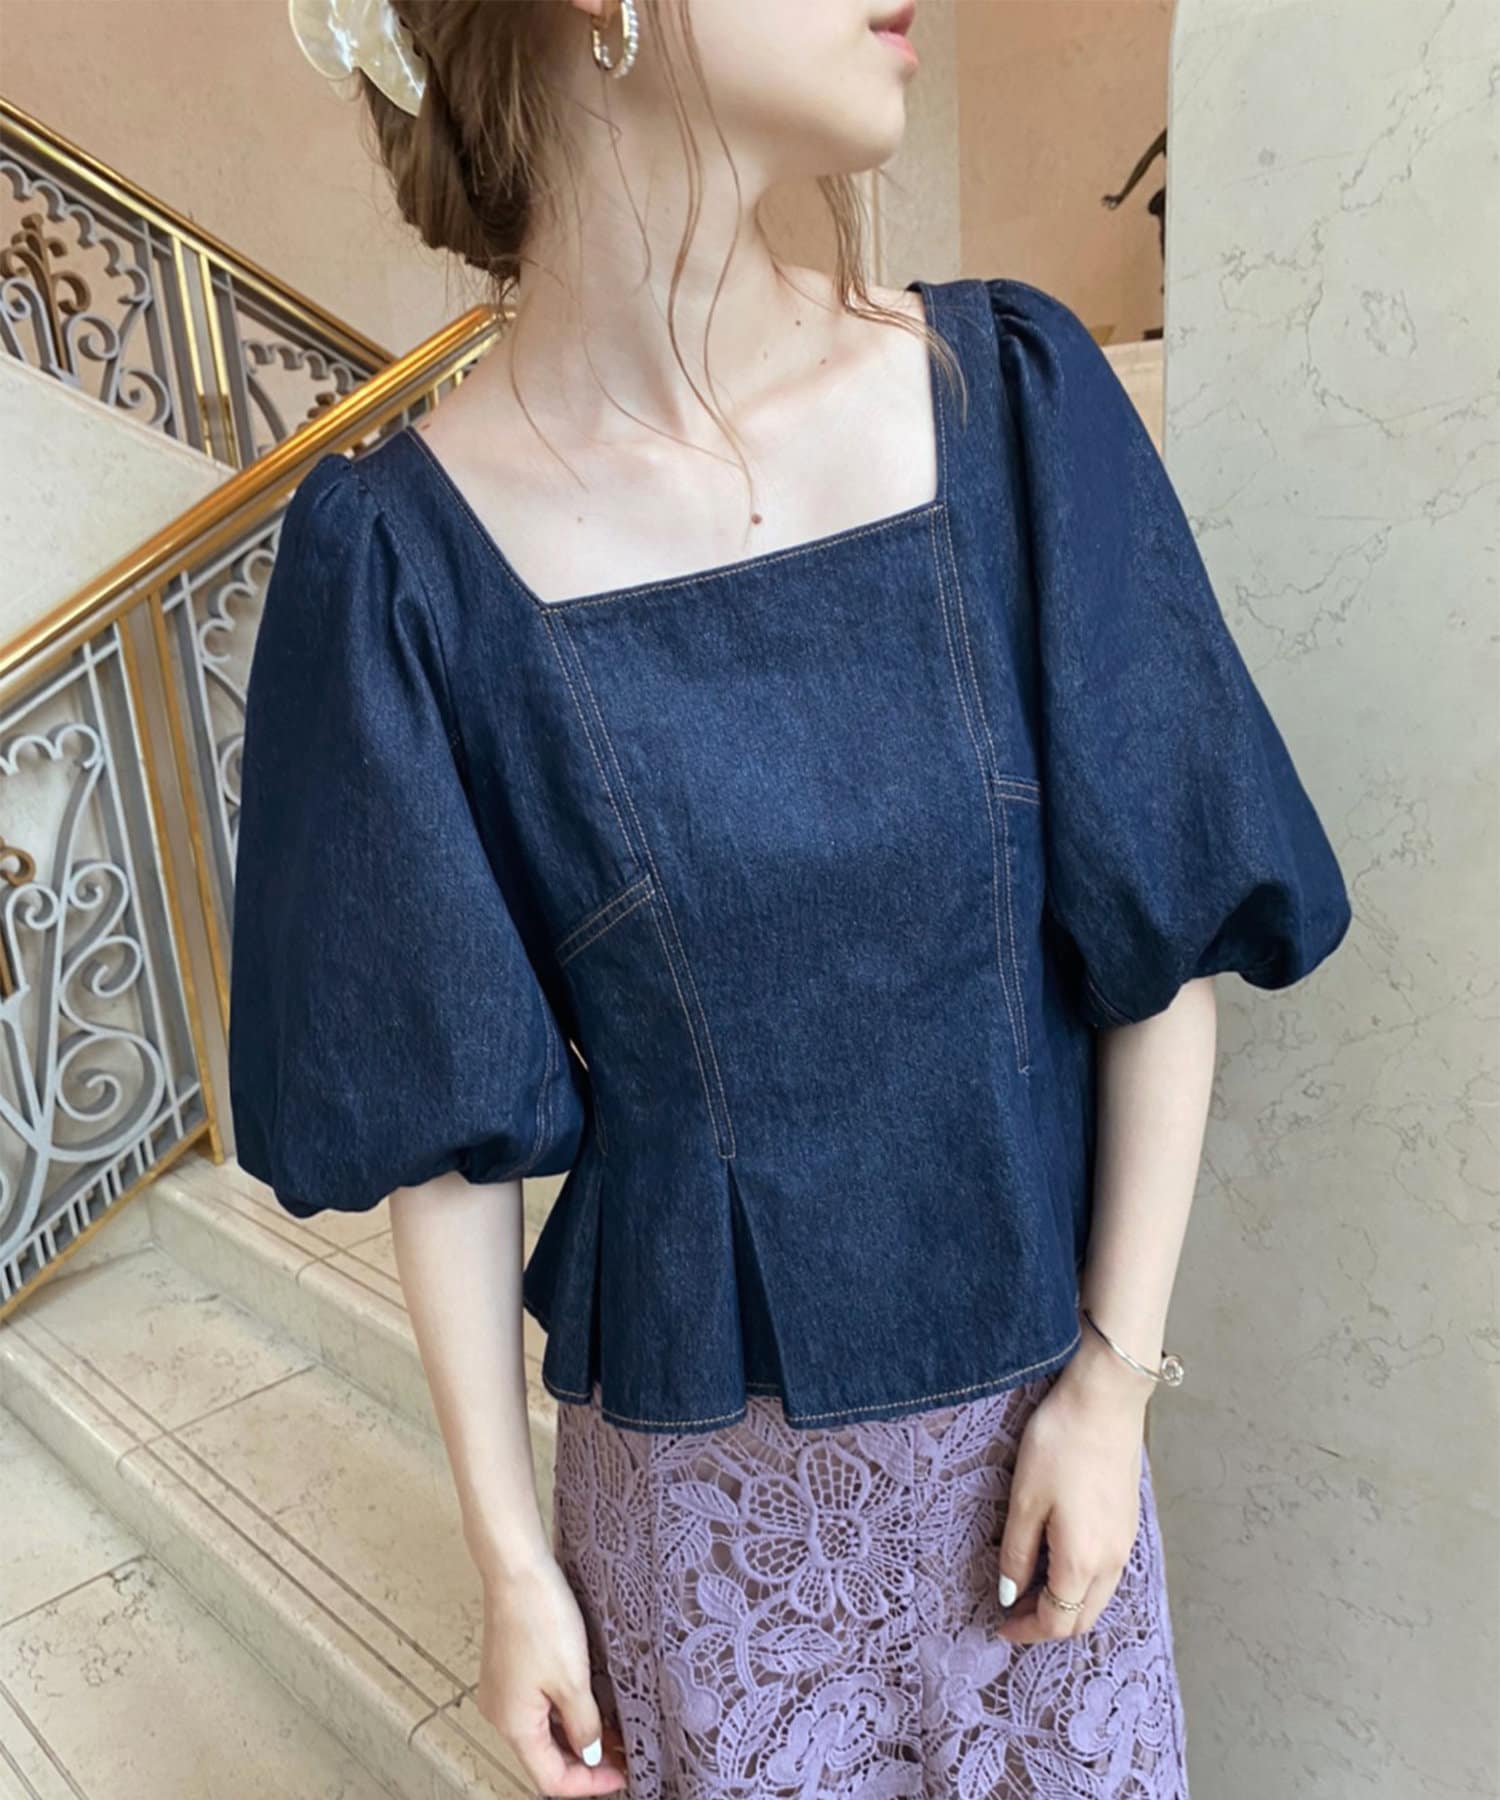 Cherie Chuu Stitch Peplum Blouse One After Another Nice Claup ワンアフターアナザー ナイスクラップ レディース Pal Closet パルクローゼット パルグループ公式ファッション通販サイト